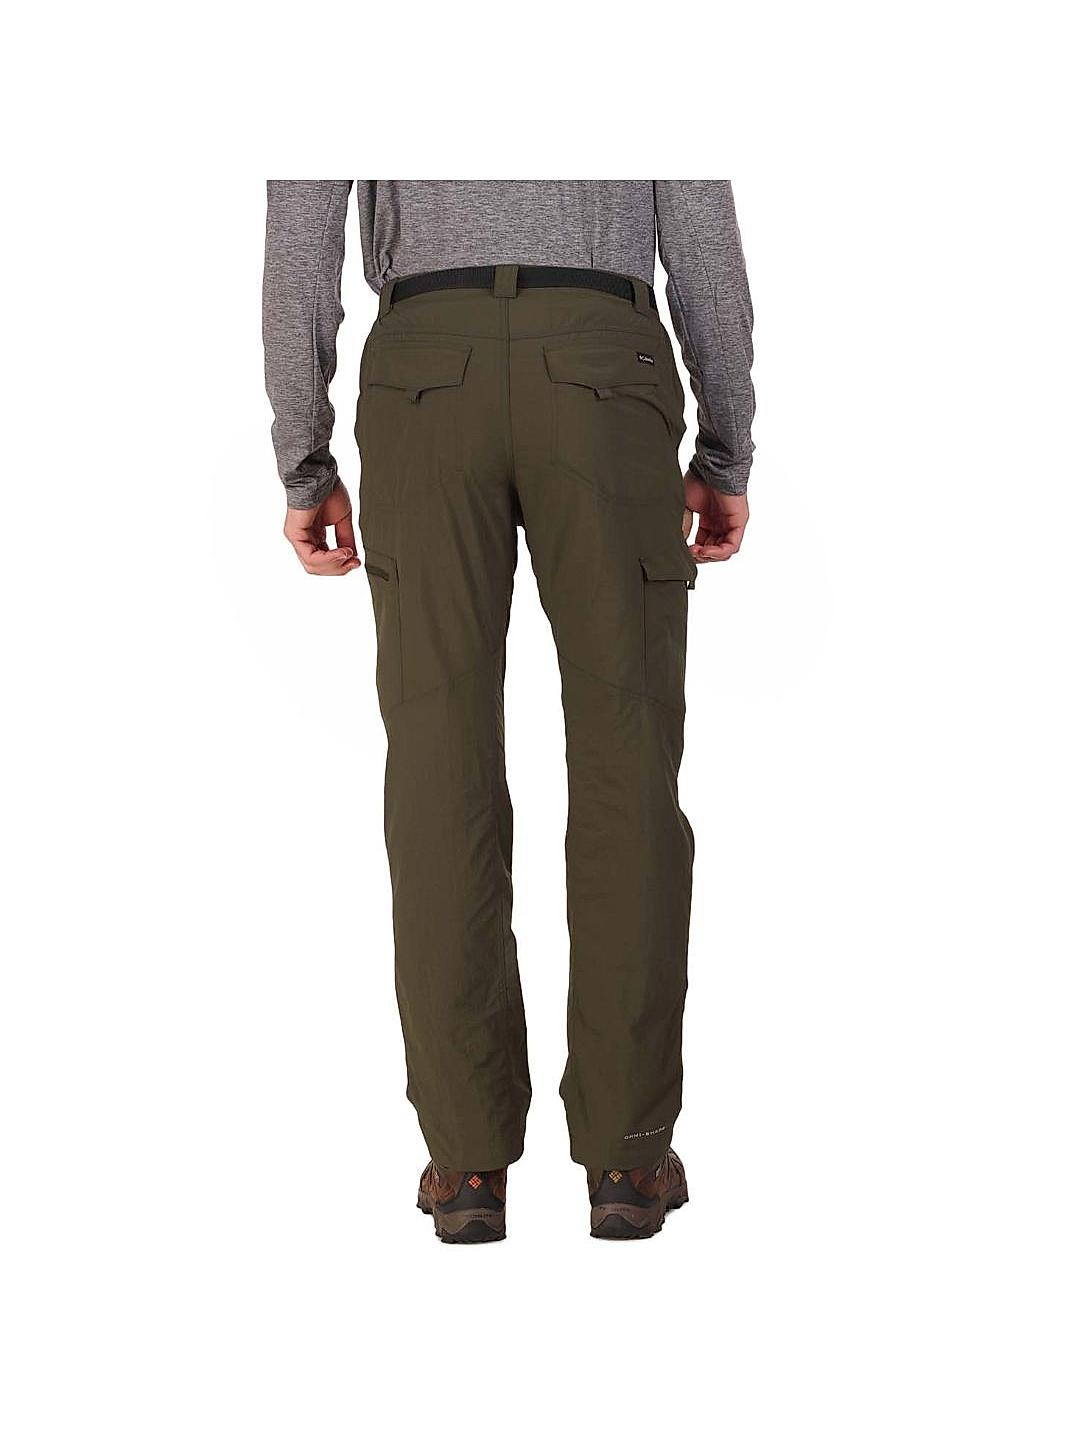 Buy Green Trousers & Pants for Men by MAX Online | Ajio.com